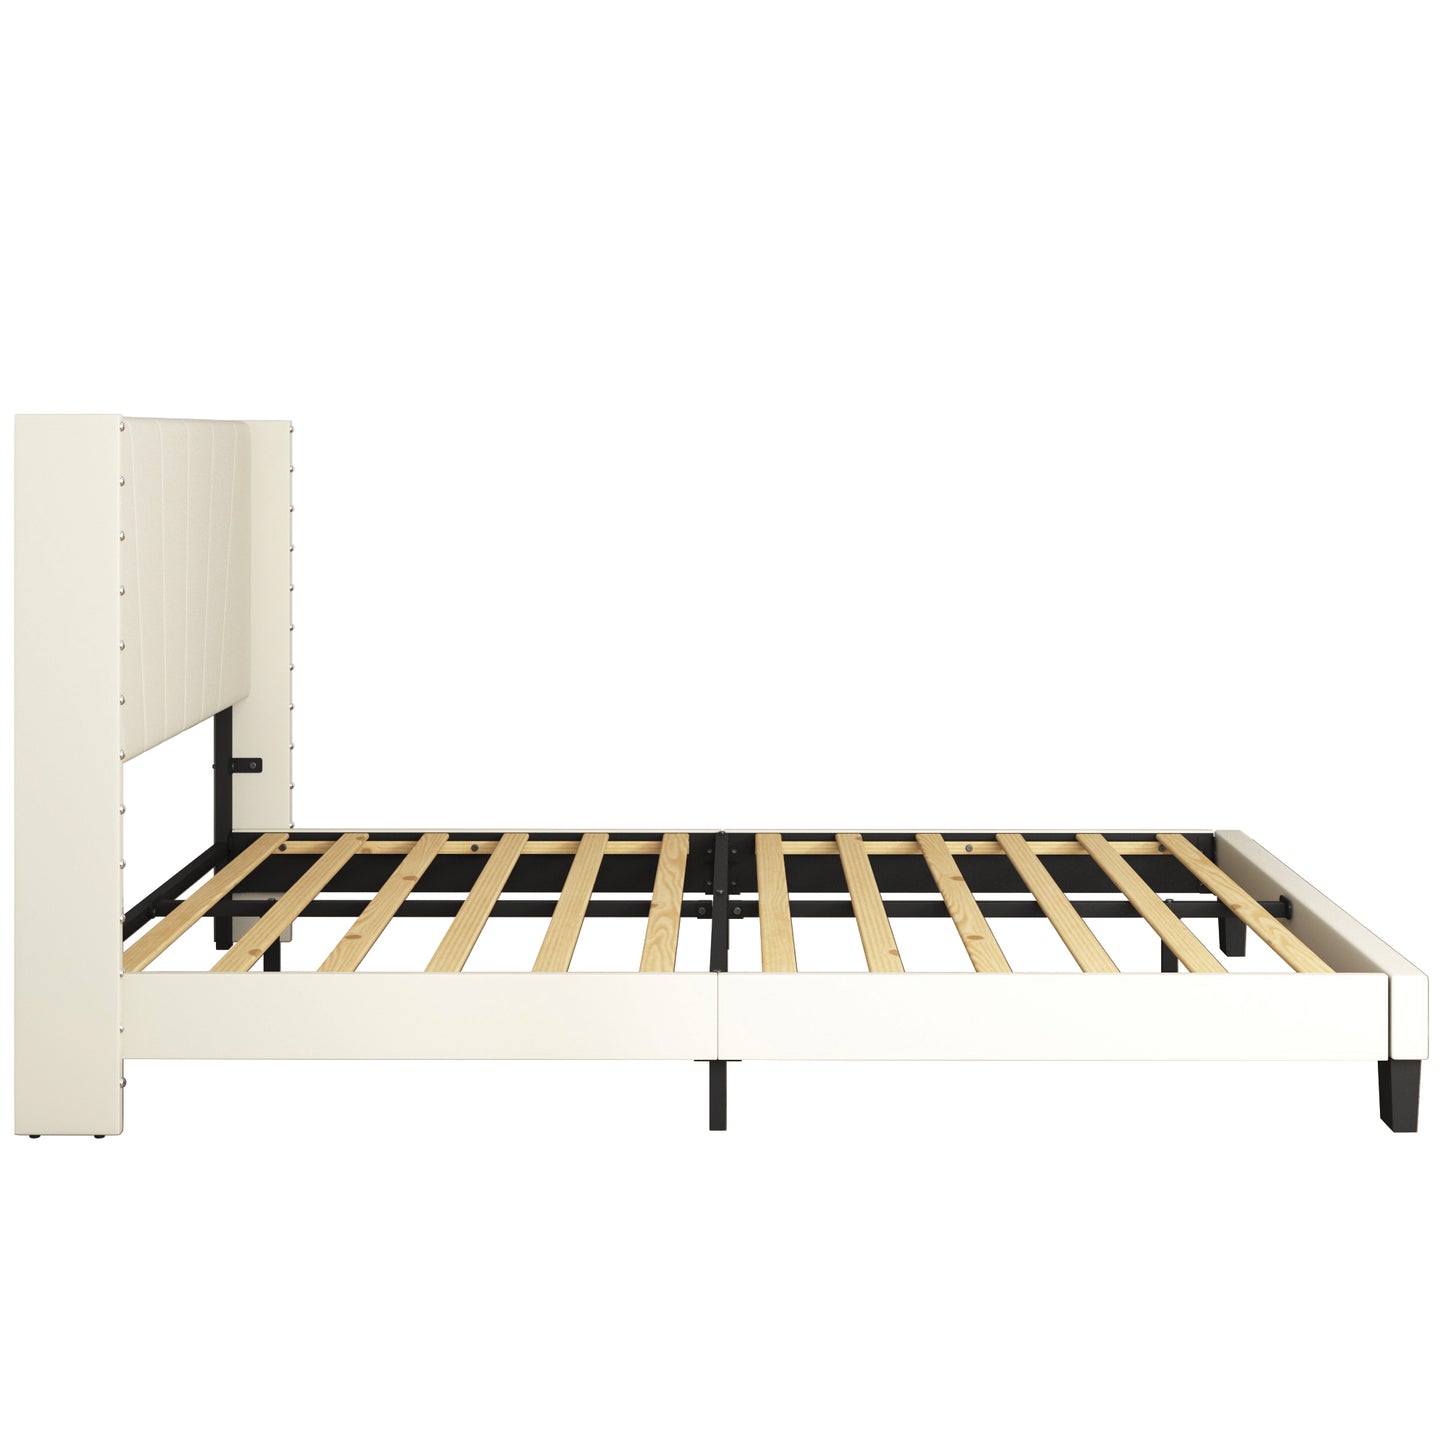 SYNGAR Beige Fabric Upholstered Platform Bed Frame Queen Size with Rivet Wingback Headboard, Mattress Foundation with Strong Wooden Slat Support for Kids Teens Adults, No Box Spring Needed